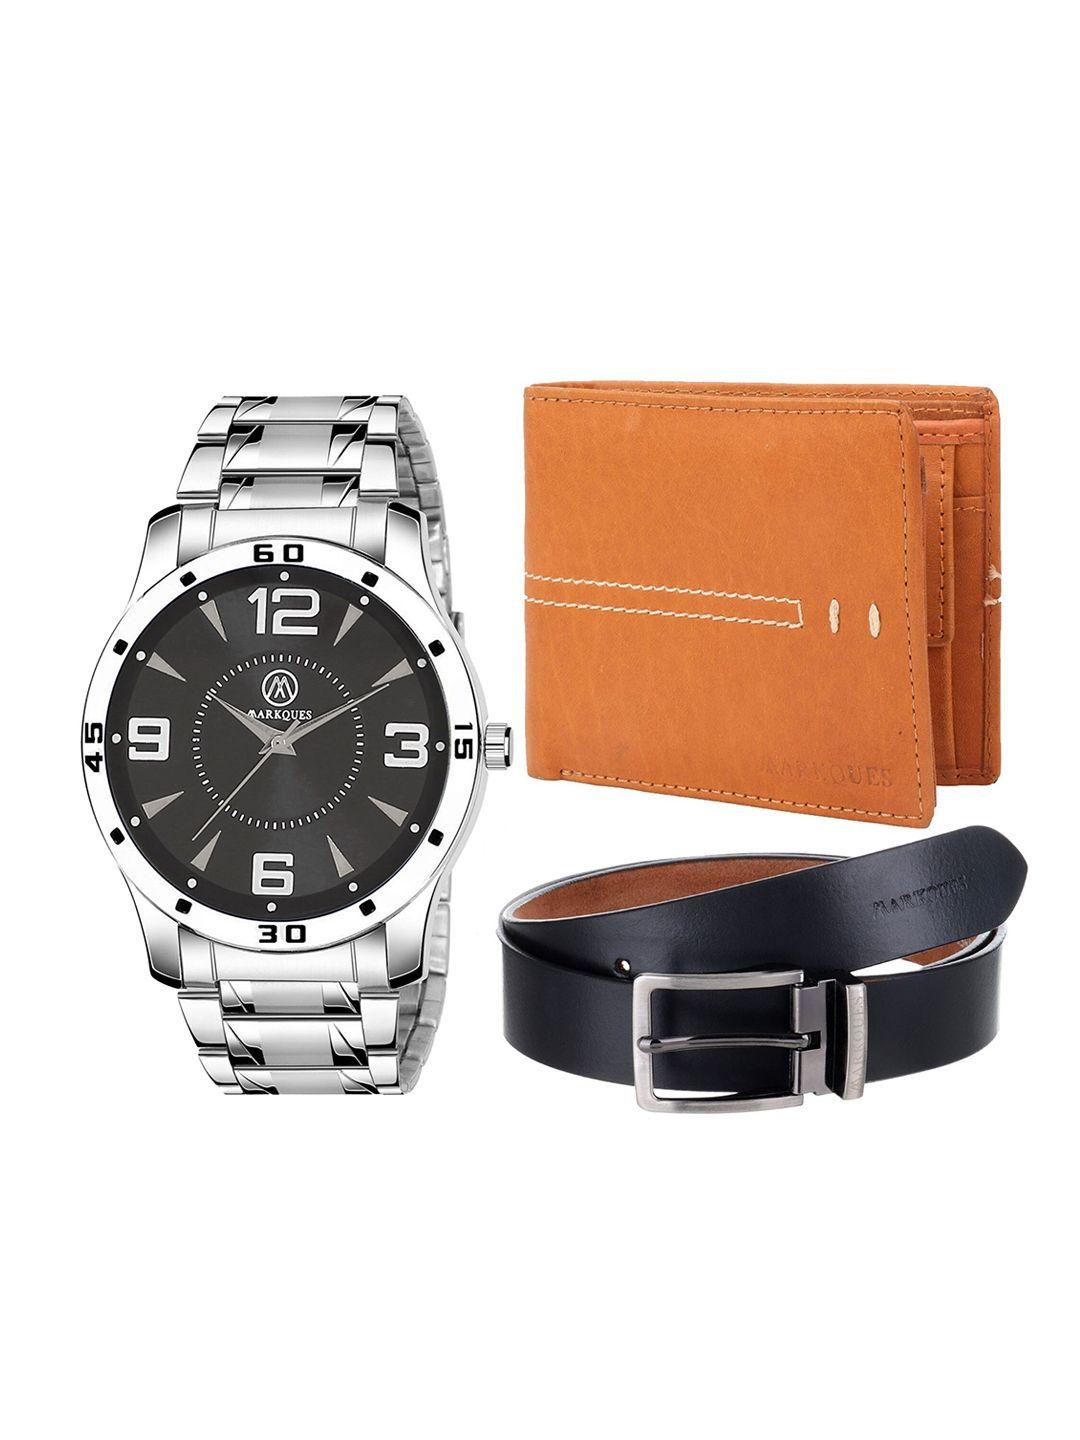 markques men brown & silver-toned solid accessory gift set